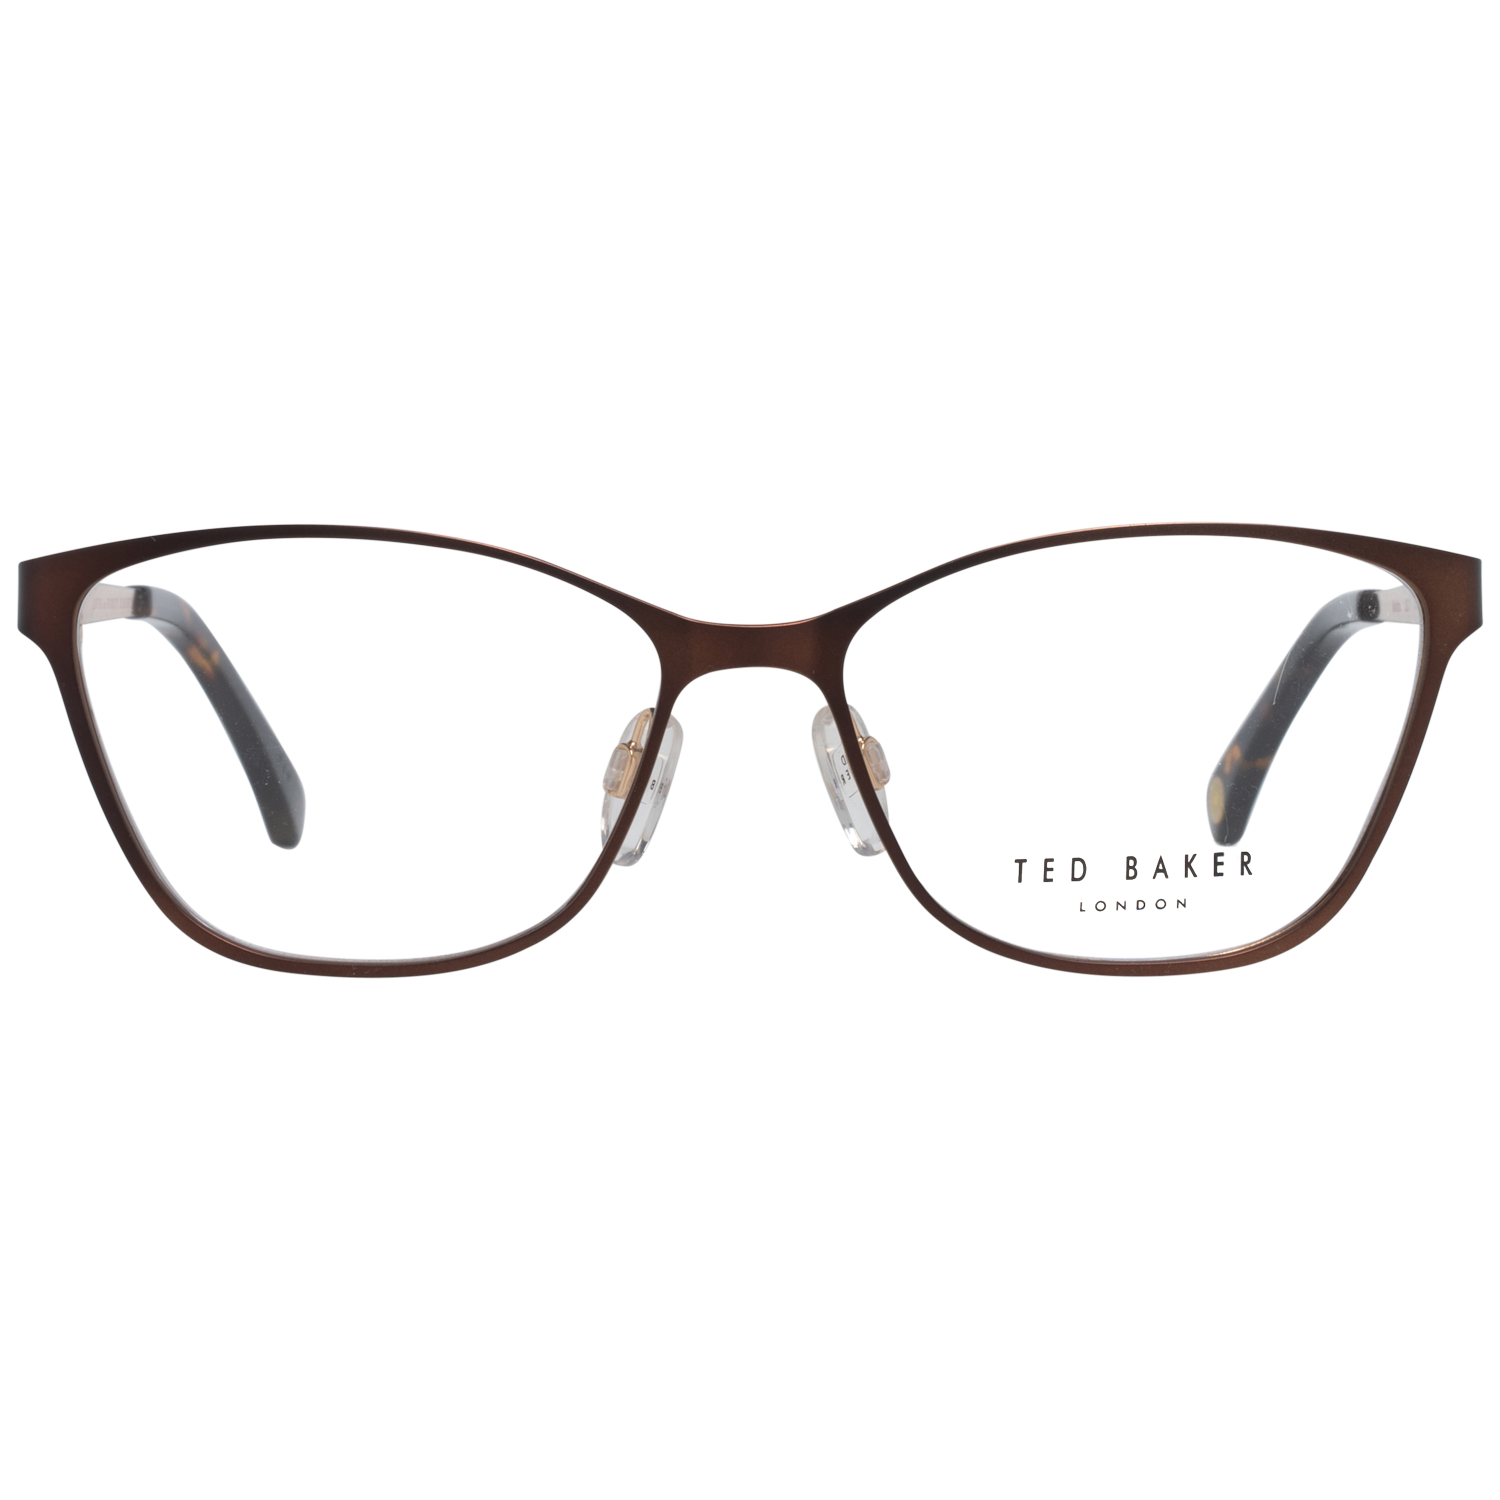 Ted Baker Cat Eye Womens Brown and Gold TB2227 Maddox Glasses are a classic cat eye style crafted from lightweight metal. The Ted Baker logo features on the plastic temple tips for brand authenticity.